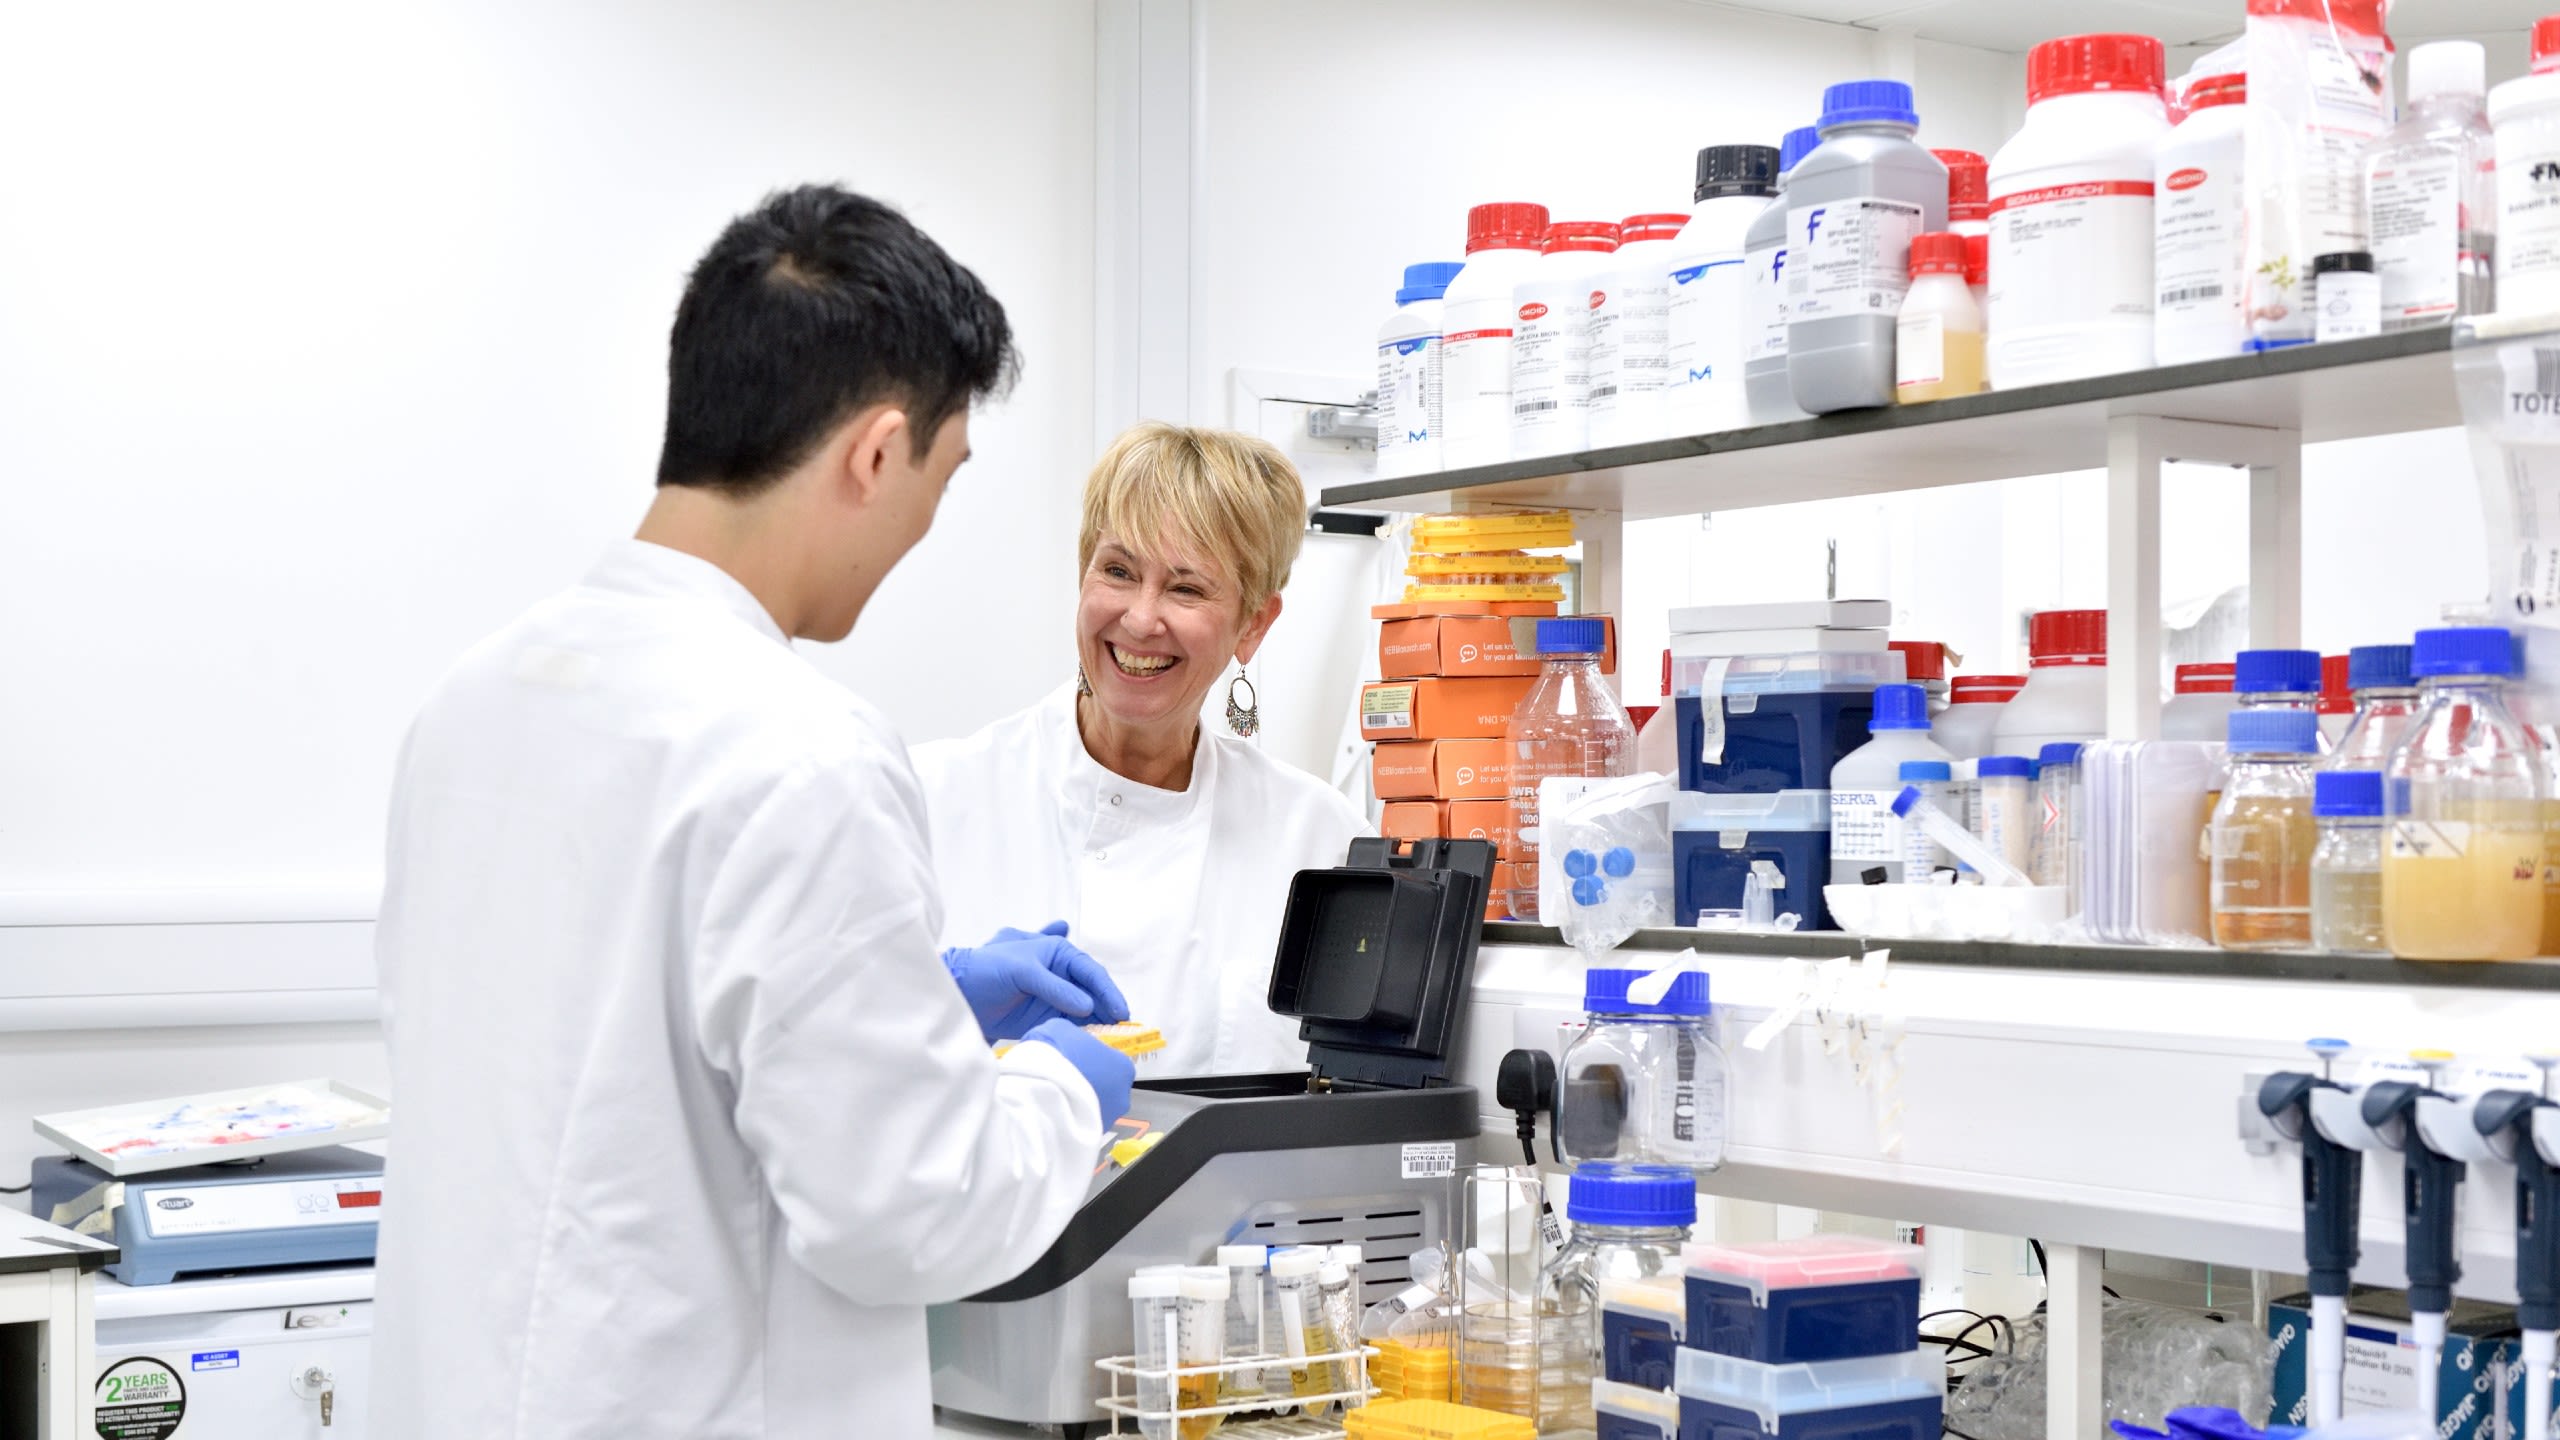 Professor Jane Davies speaks to a colleague in her lab